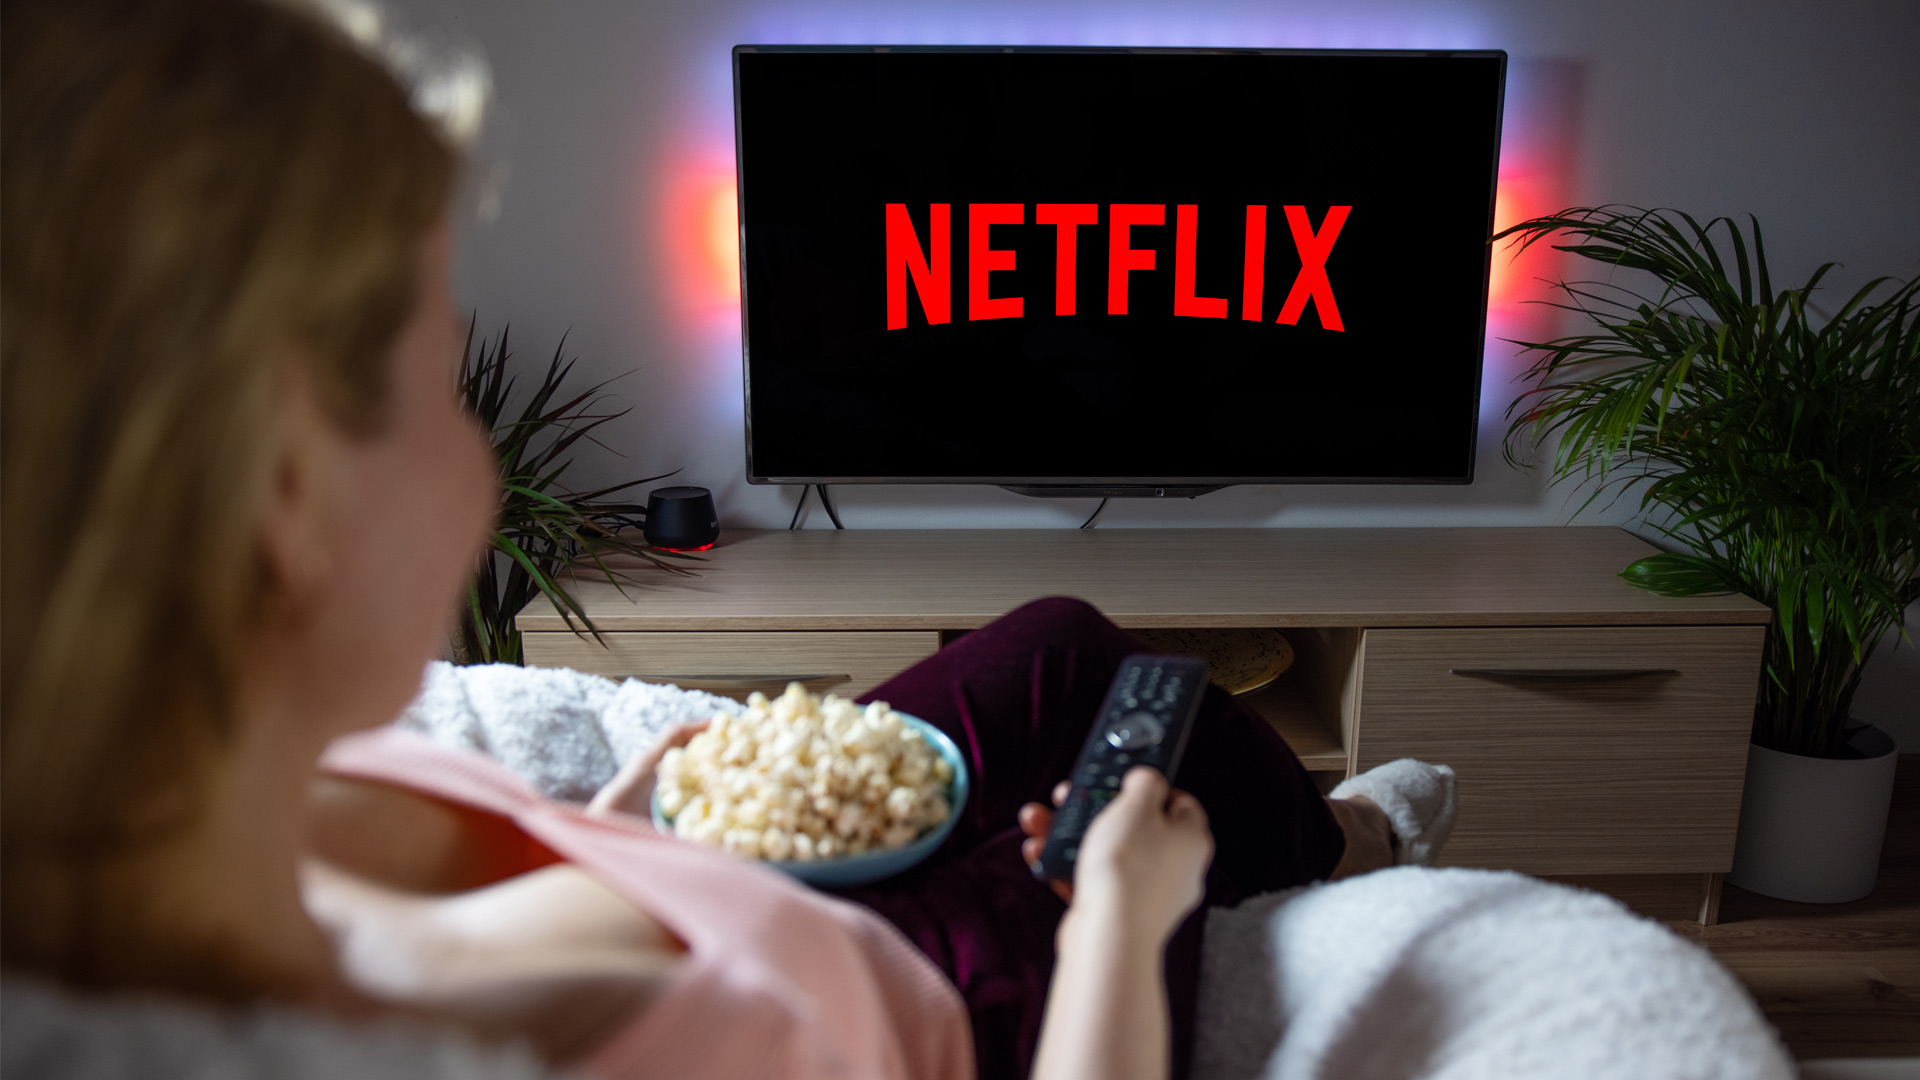 Image of a woman watching Netflix on her TV